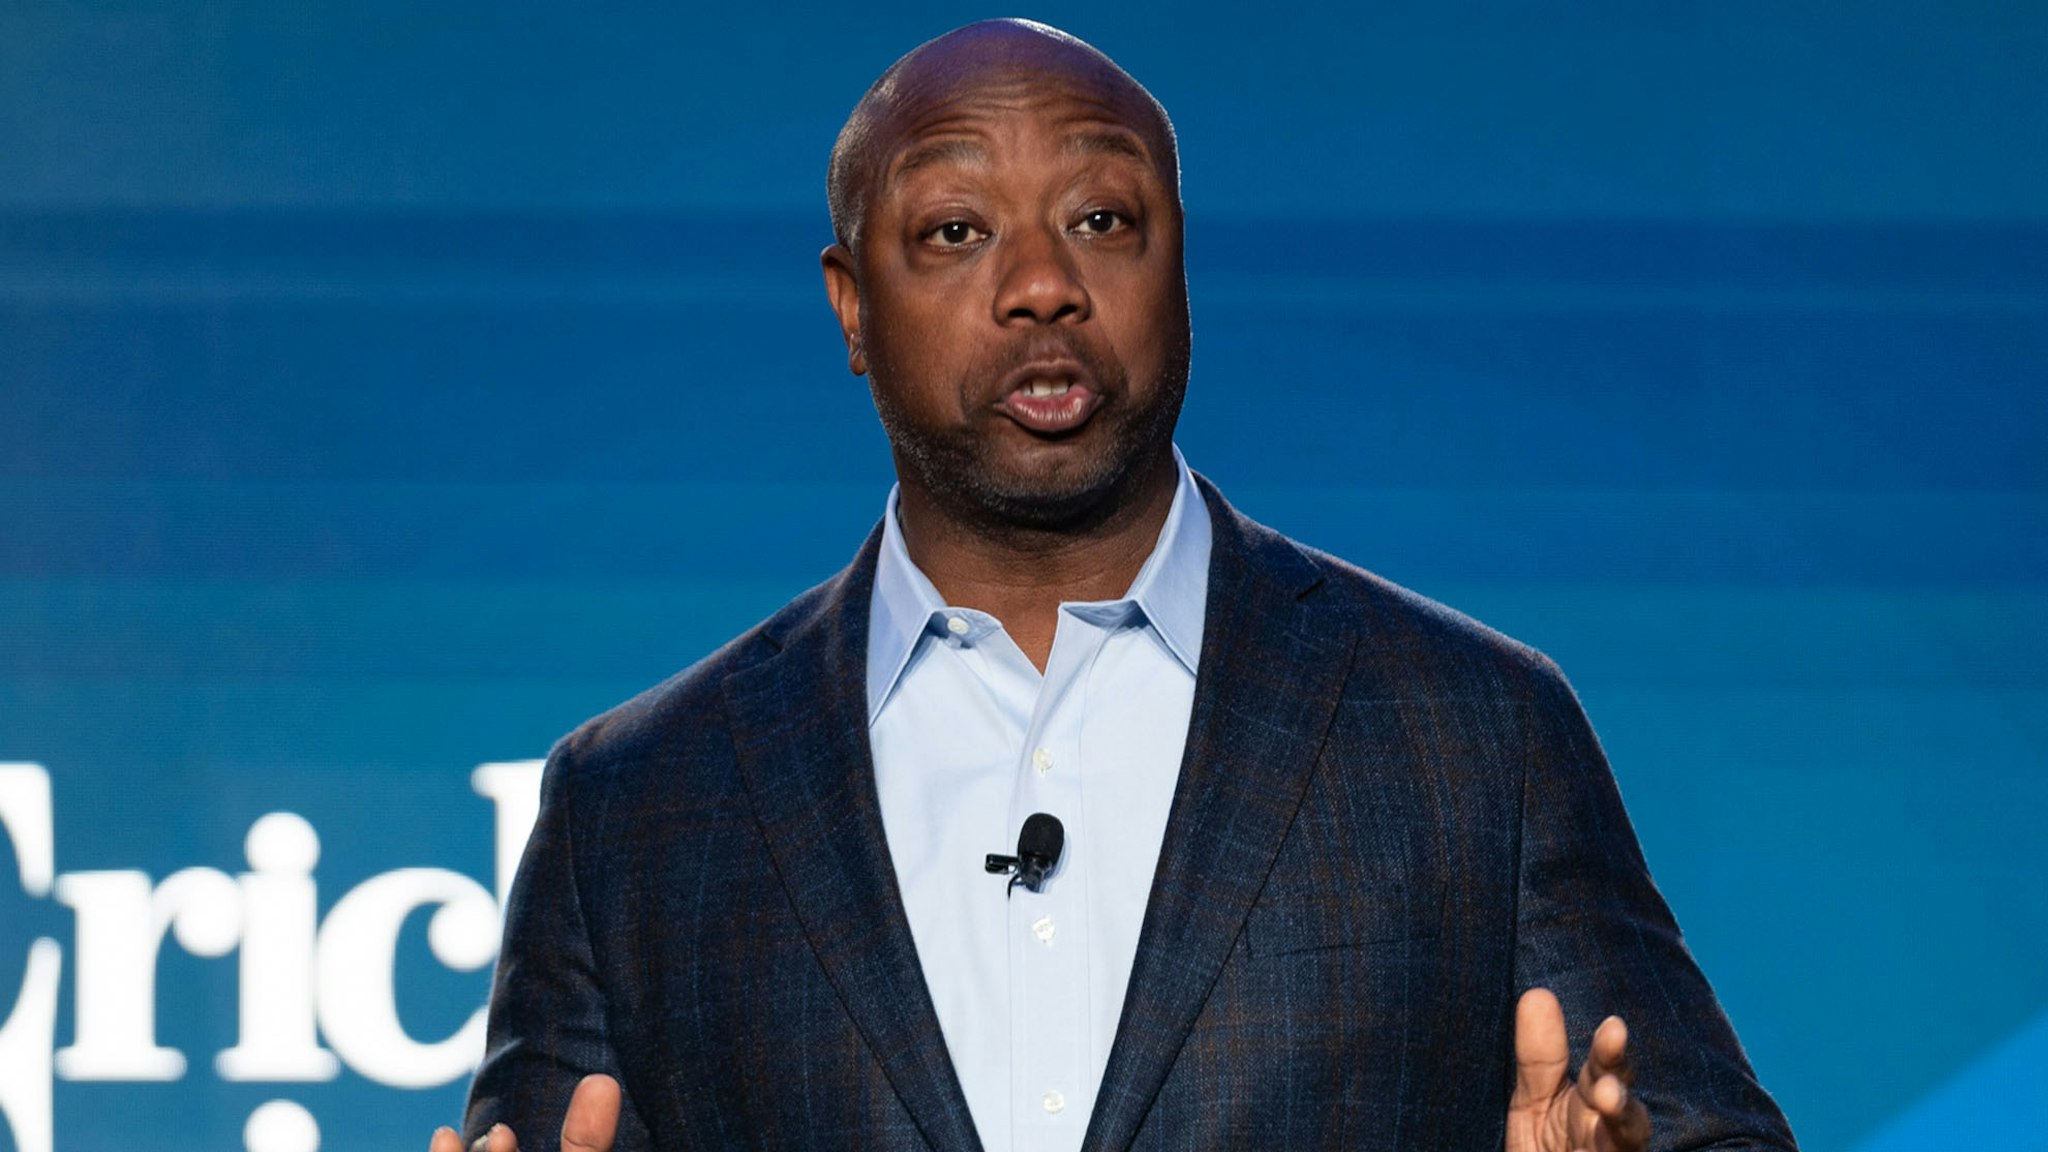 ATLANTA, GEORGIA - AUGUST 18: Republican presidential candidate U.S. Sen. Tim Scott (R-SC) speaks at an event hosted by Conservative radio host Erick Erickson on August 18, 2023 in Atlanta, Georgia. The first debate of the Republican Presidential primary is set to take place August 23, 2023.